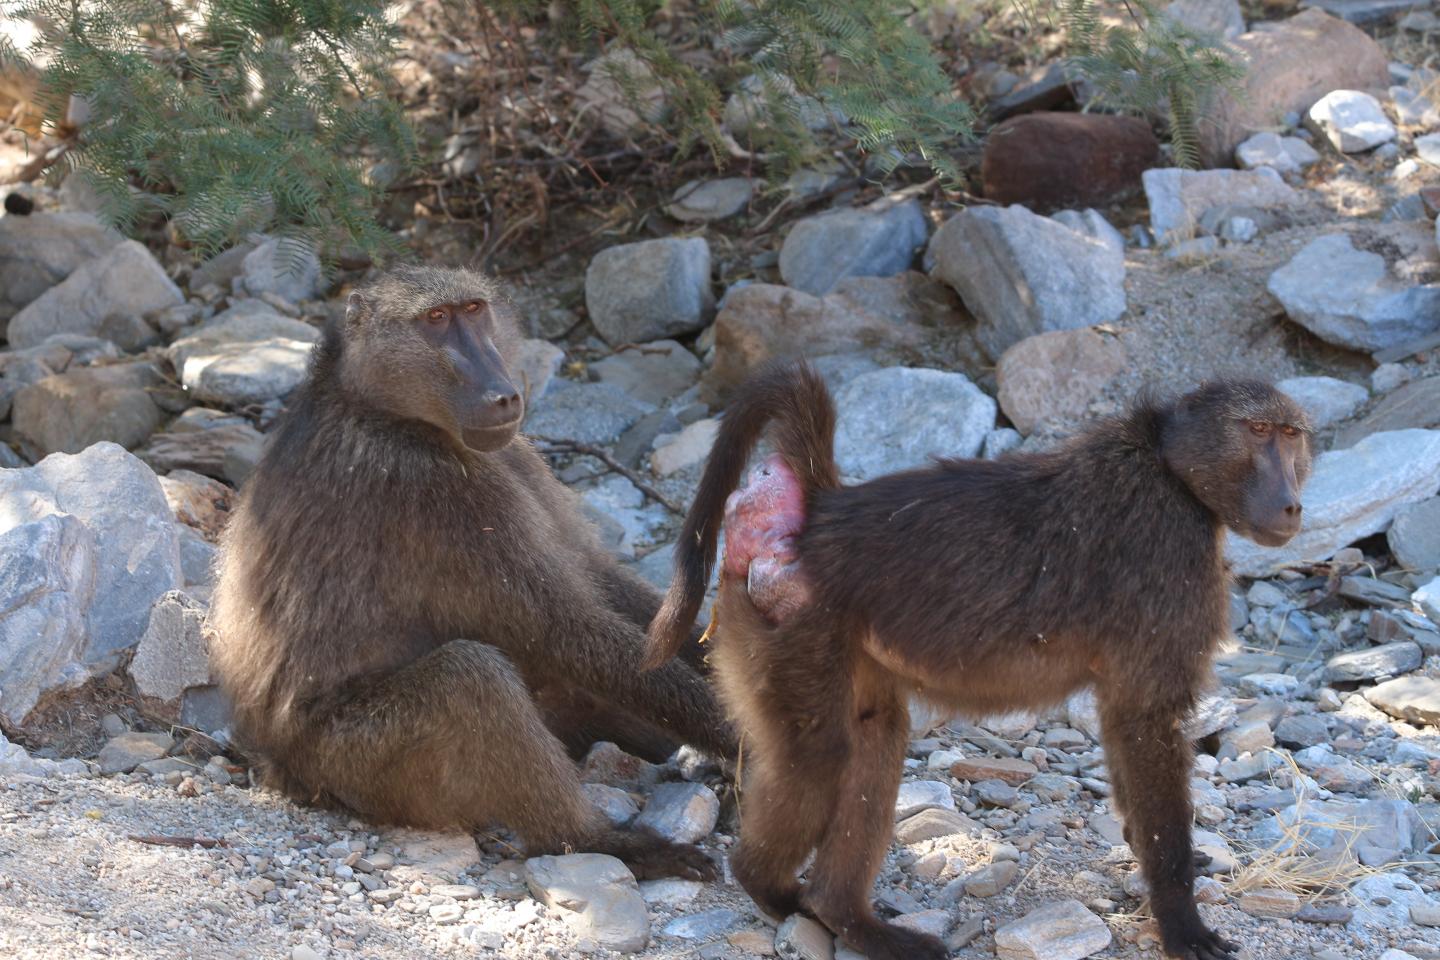 Female Baboon Presenting to Male